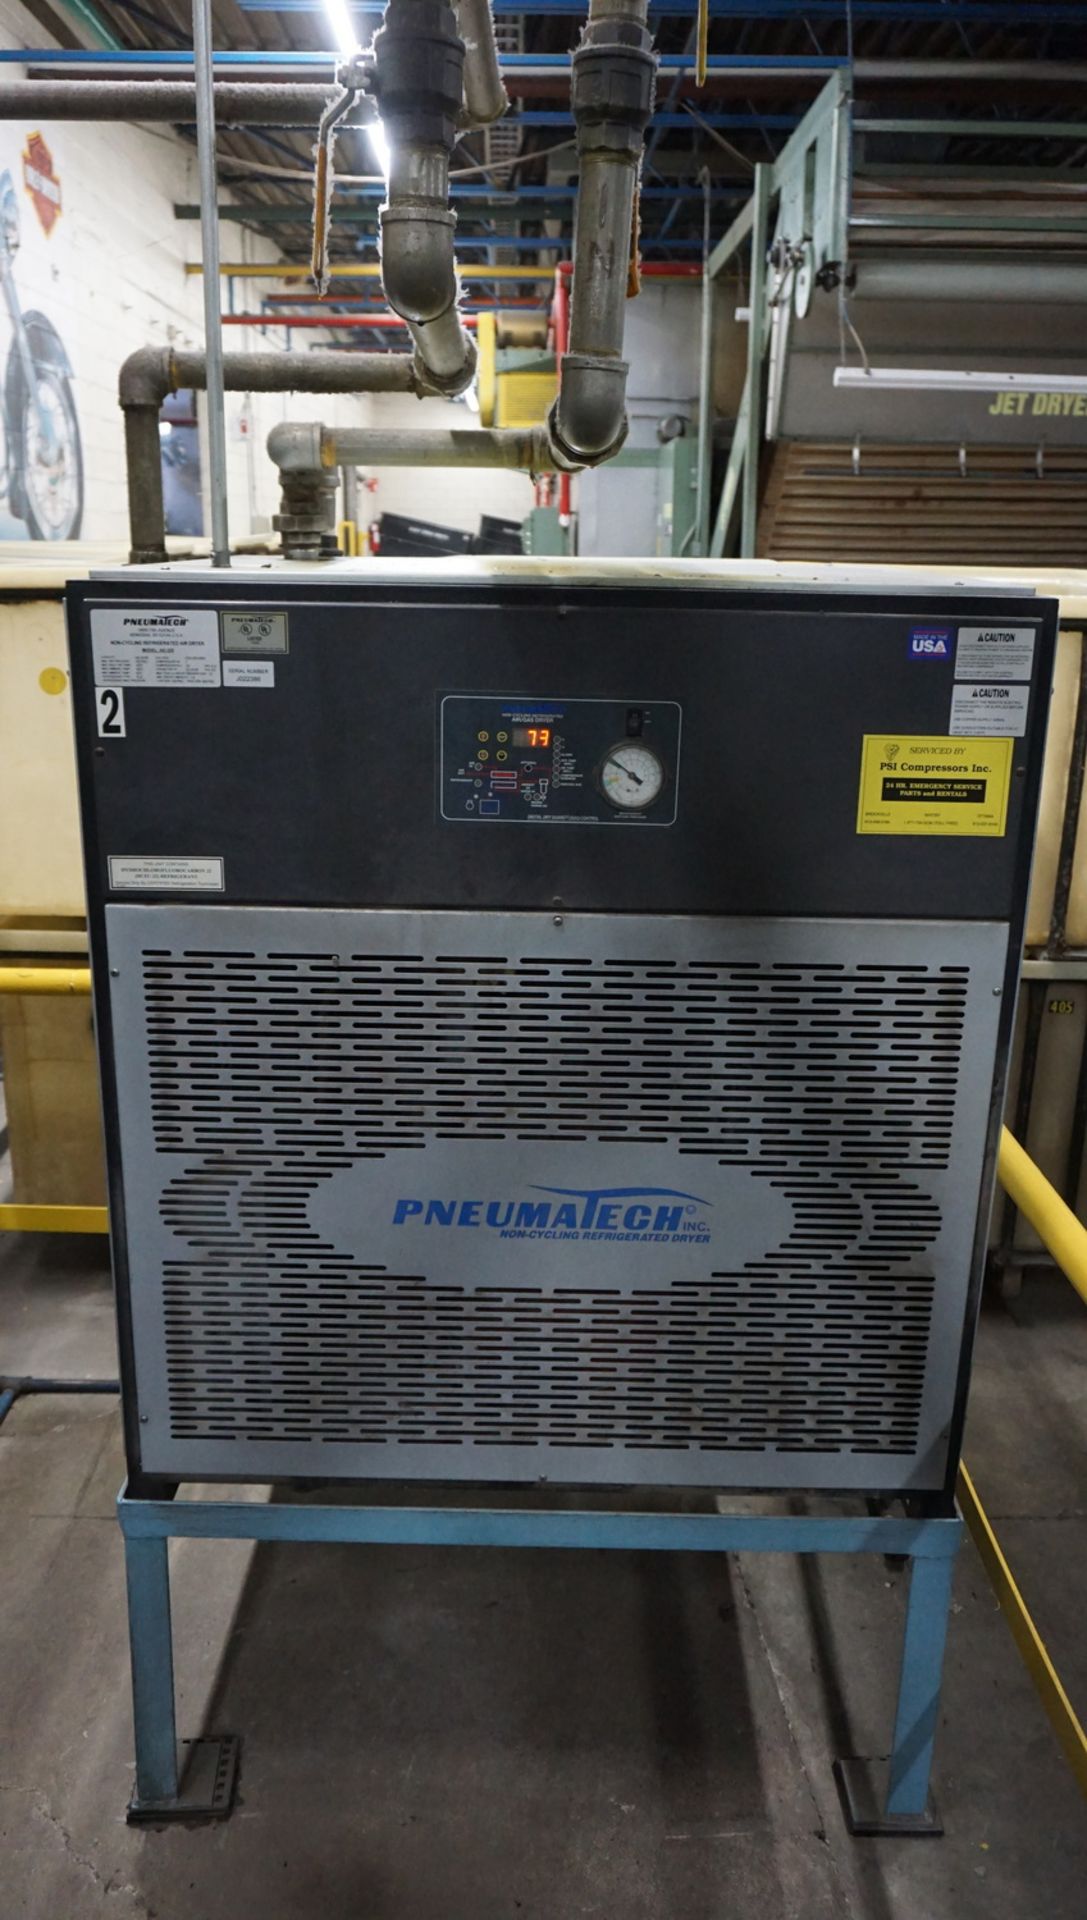 PNEUMATIC AD-235 REFRIGERATED AIR DRYER, S/N J022386 (575V/60HZ/3PH) (DELAYED PICKUP MAY 1, 2023)